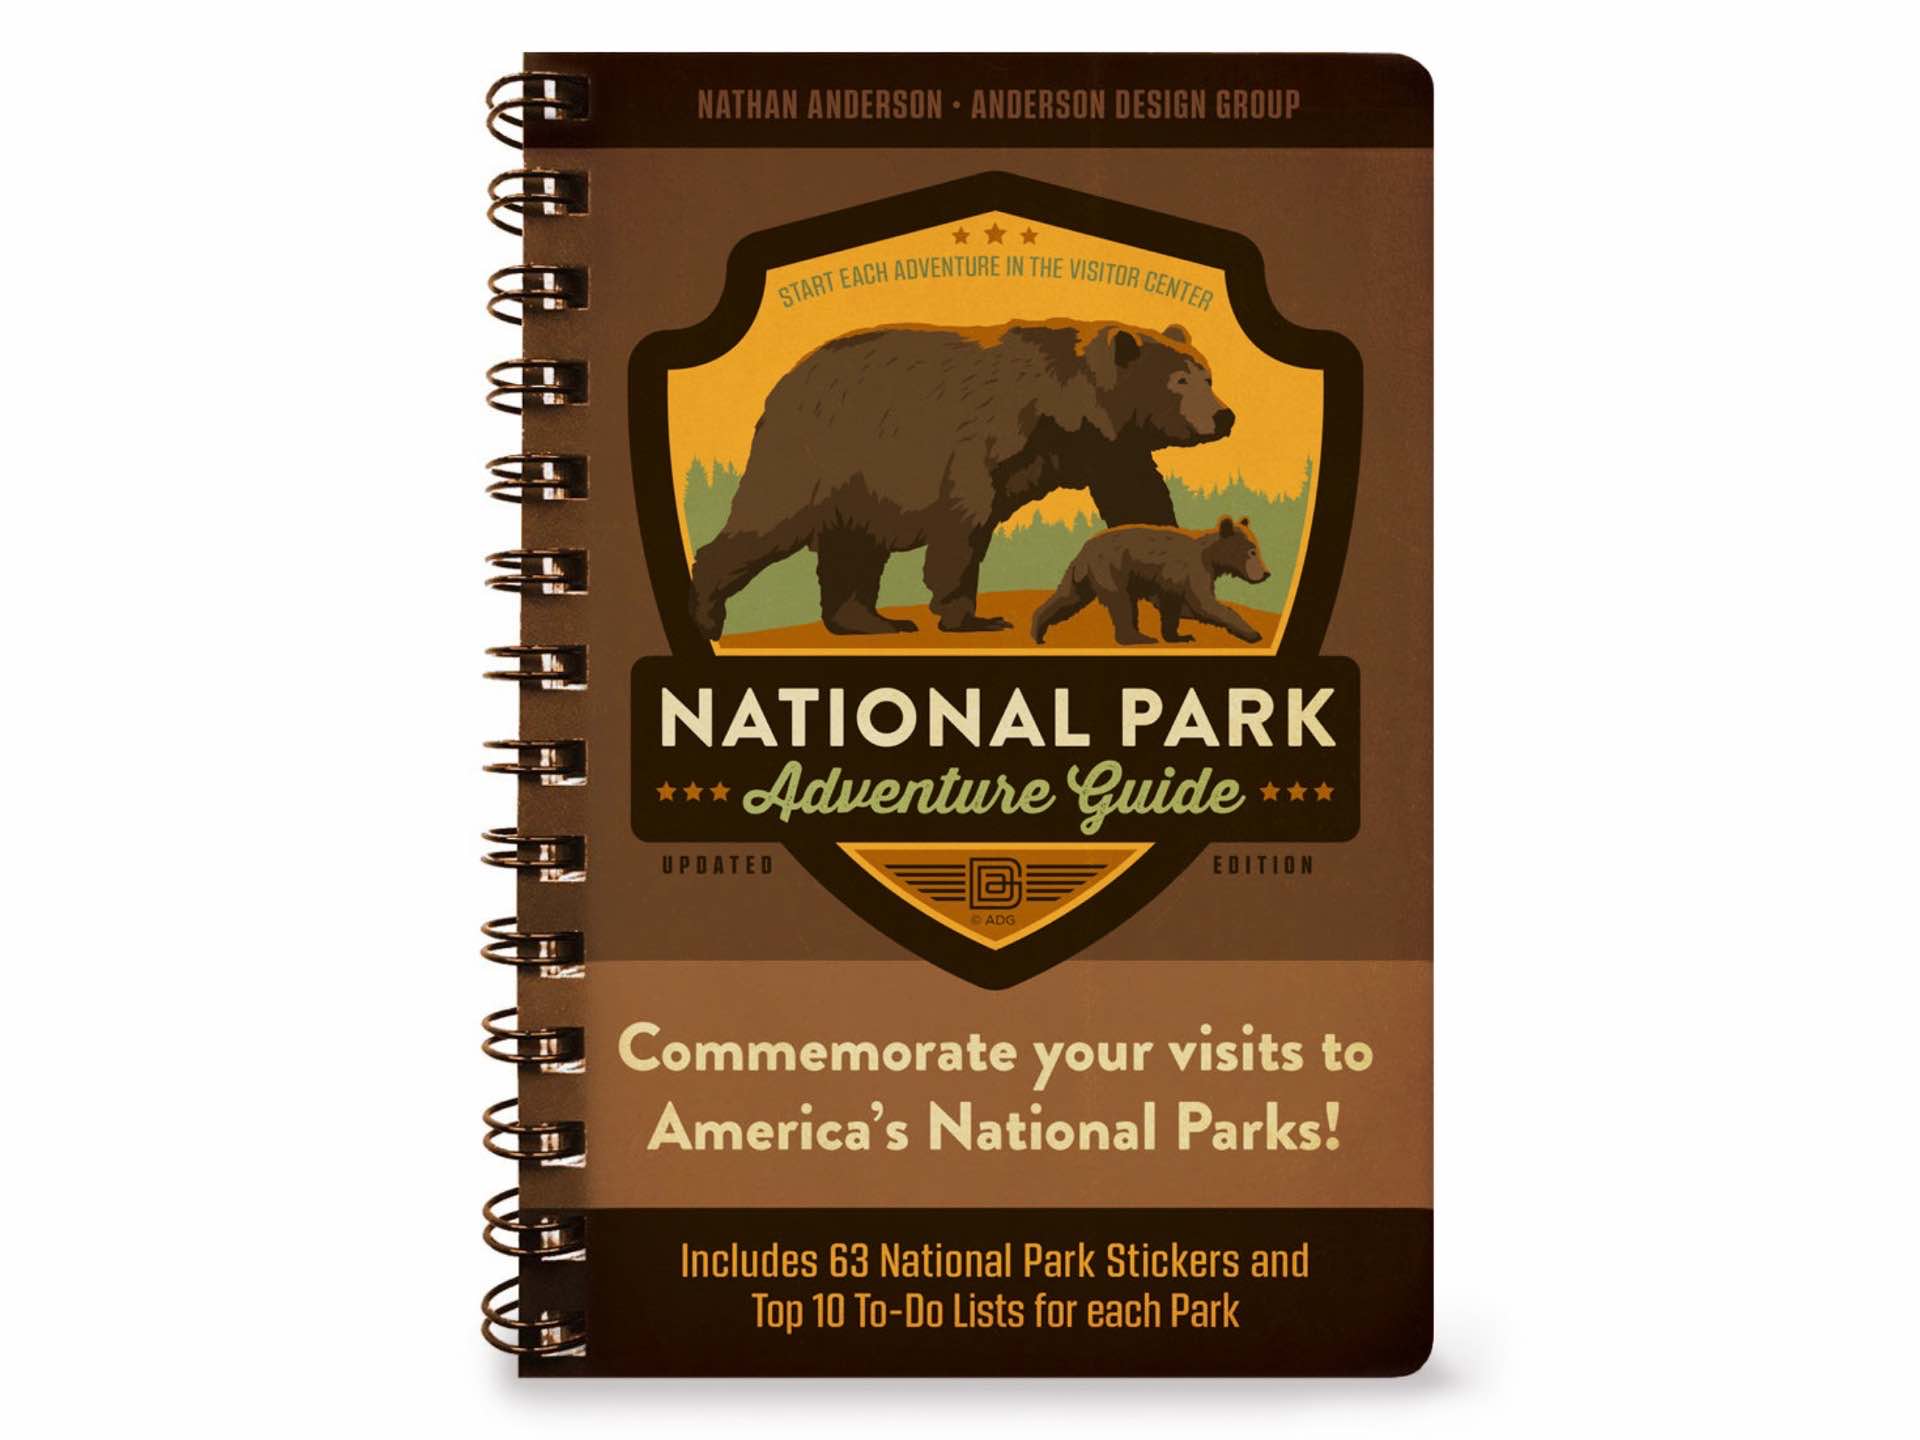 anderson-design-group-national-park-adventure-guide-book-2022-edition